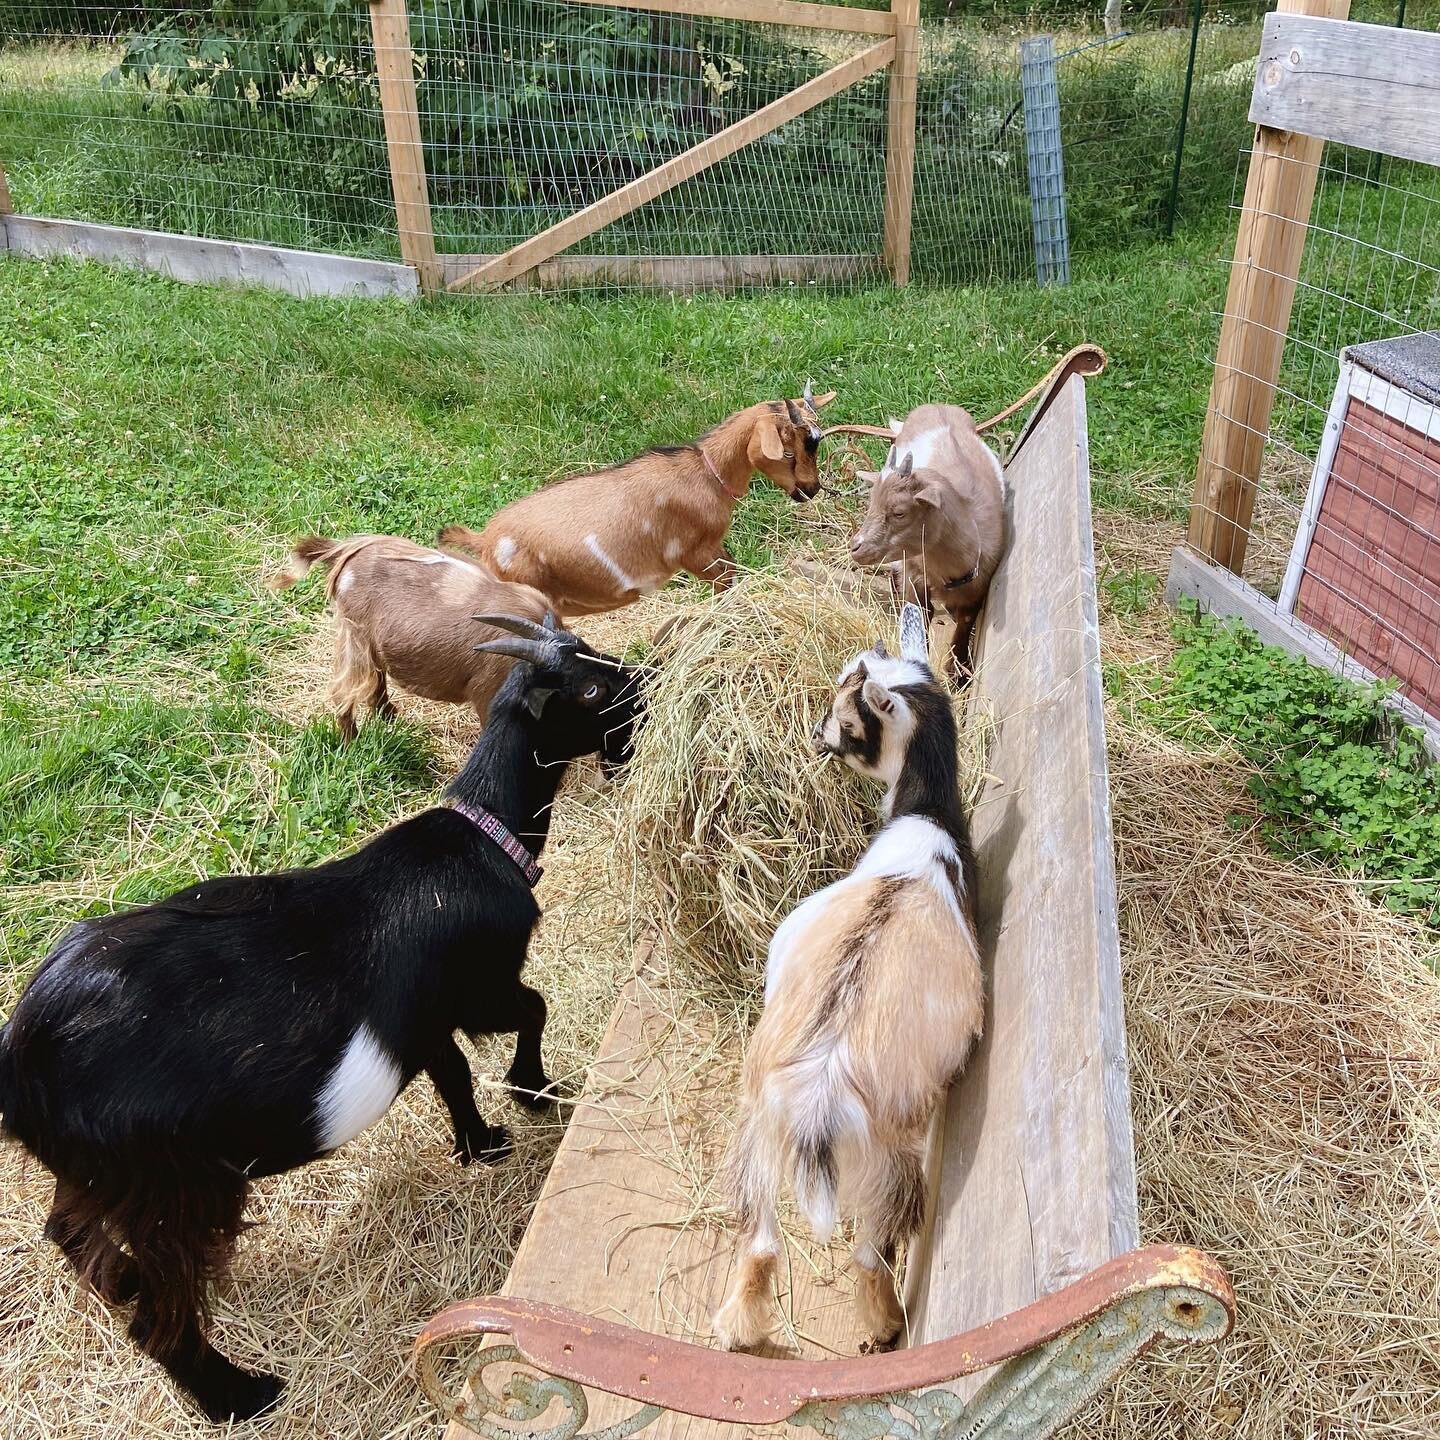 It&rsquo;s a new week #hellomonday 🌞🌱 I hope everyone has a great start ❤️ and remembers all the things you are grateful for&hellip;every day is a gift no matter the day ❤️#liveauthentic #nigeriandwarfgoats #dairygoats #rivermadefarmstead #thankful